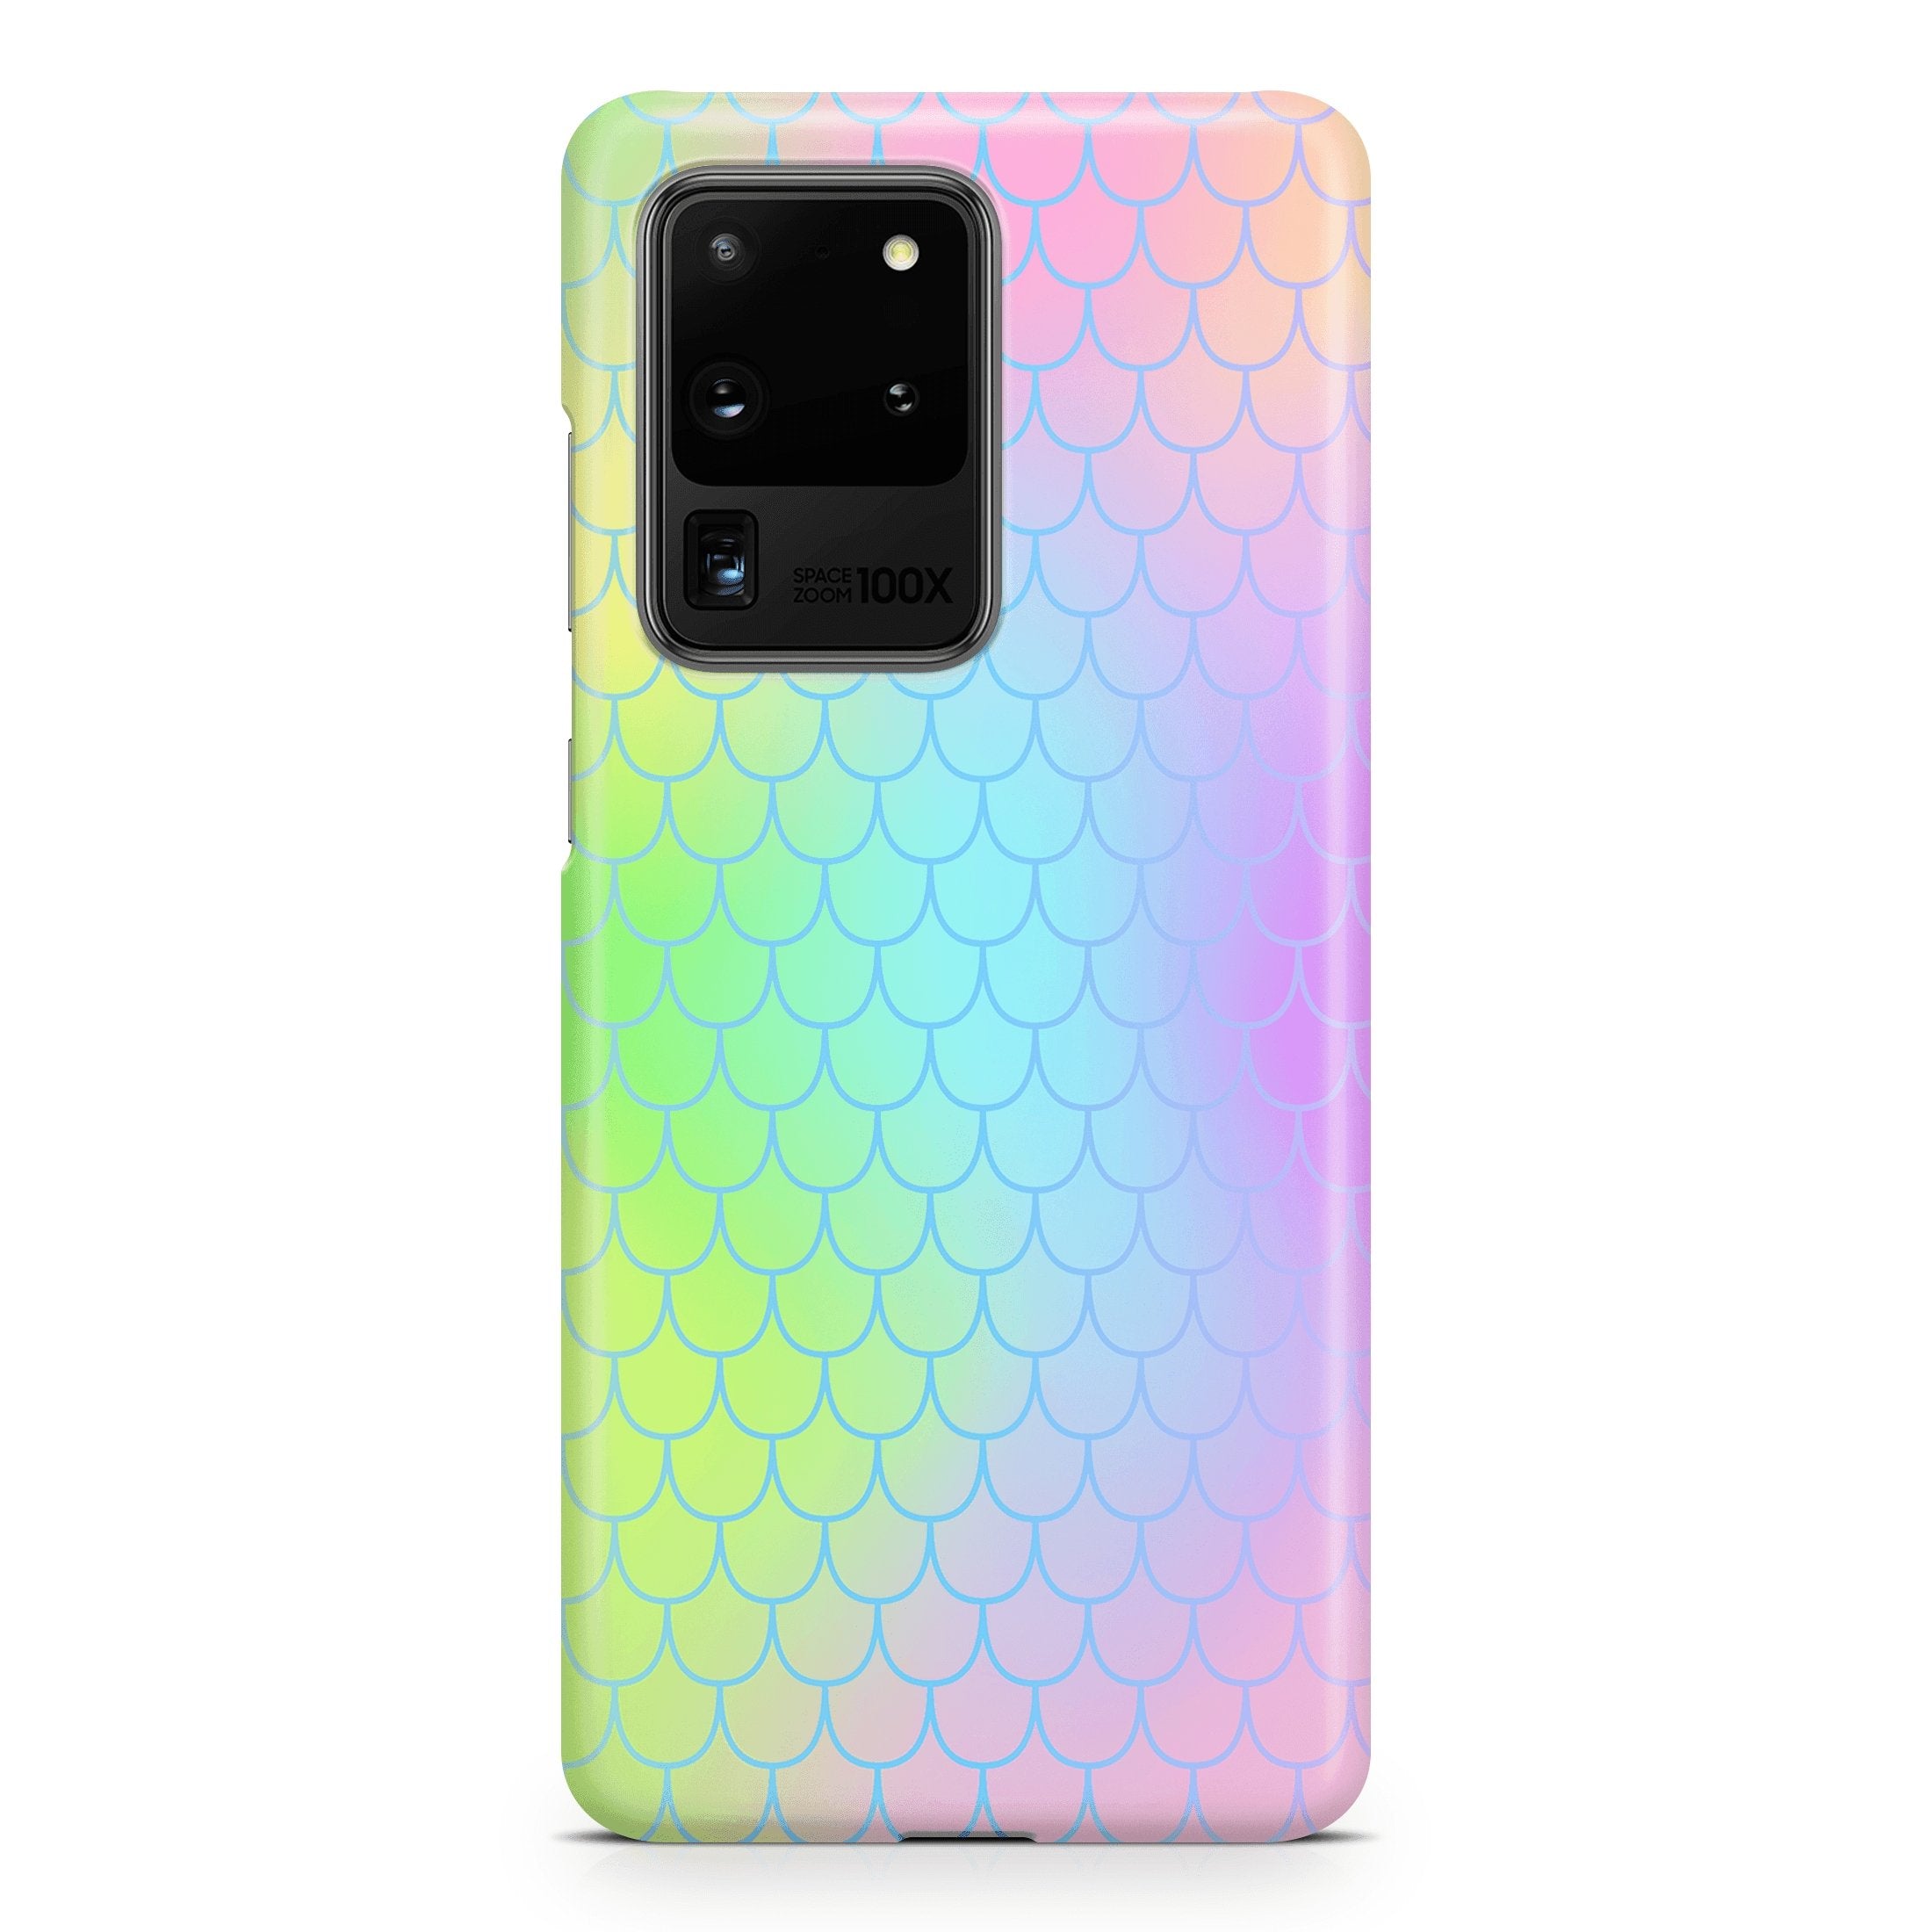 Unicorn Mermaid Scale - Samsung phone case designs by CaseSwagger